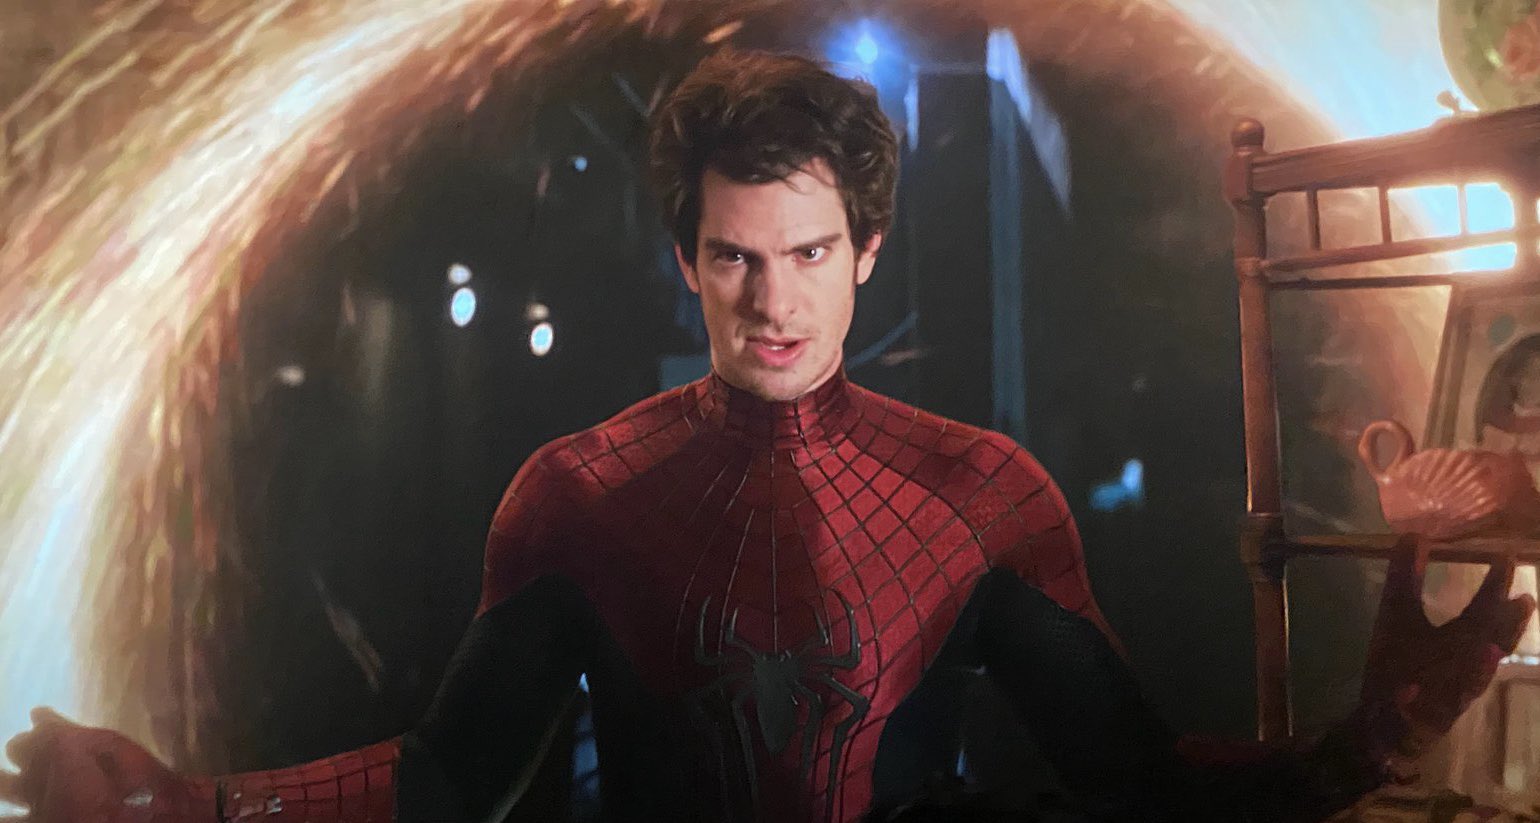 Andrew Garfield's Spider-Man steps out of a portal.